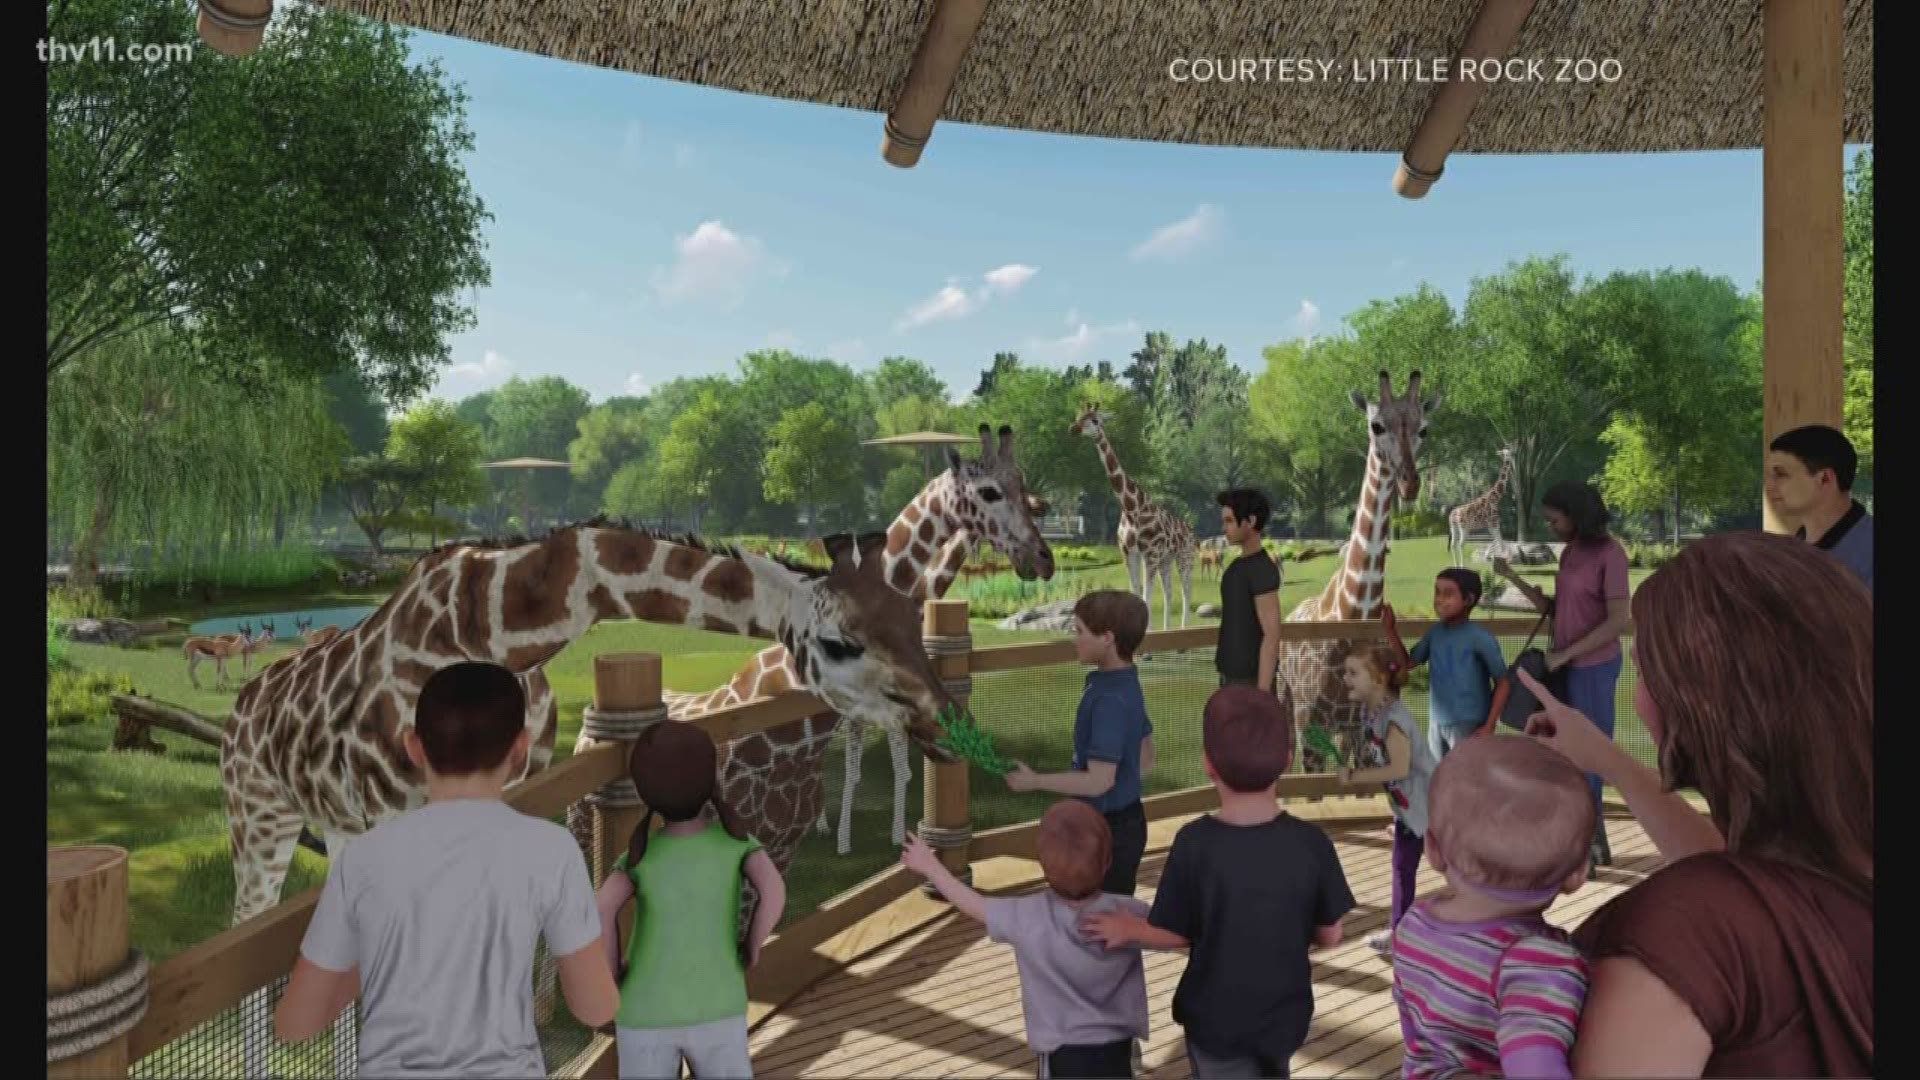 Little Rock Zoo leaders say they're in need of the public's help. Funding problems are putting its status as one of the country's leading zoos at risk.